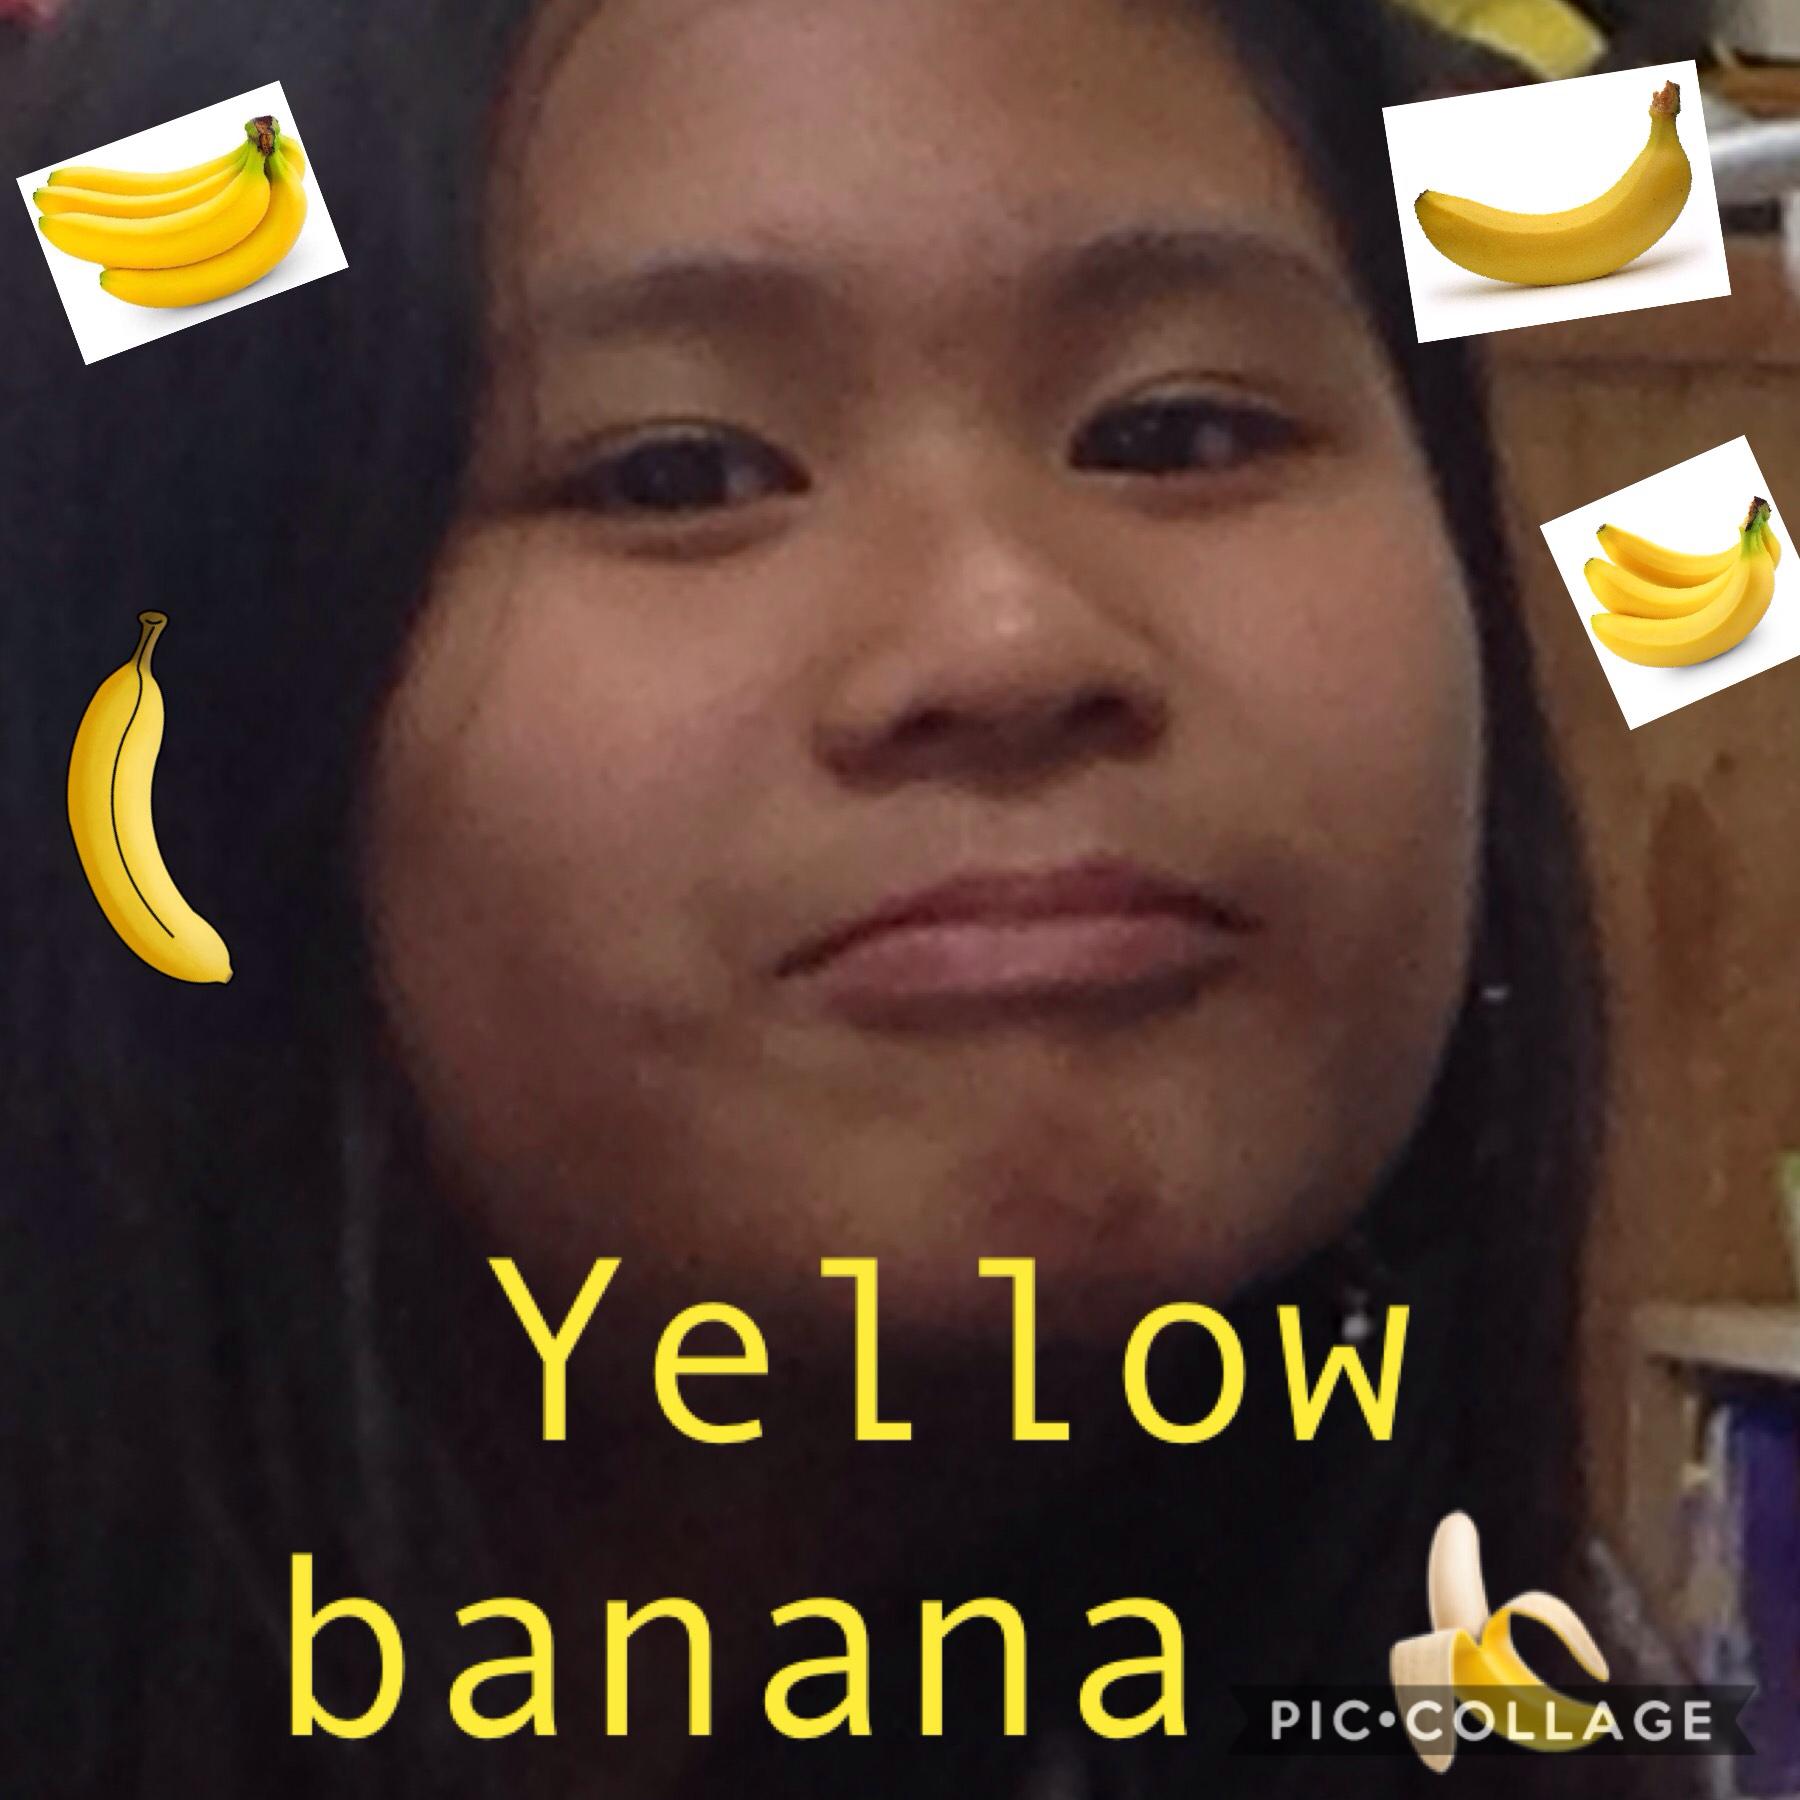 This is for yellow_banana ✌🏻😜🍌😃